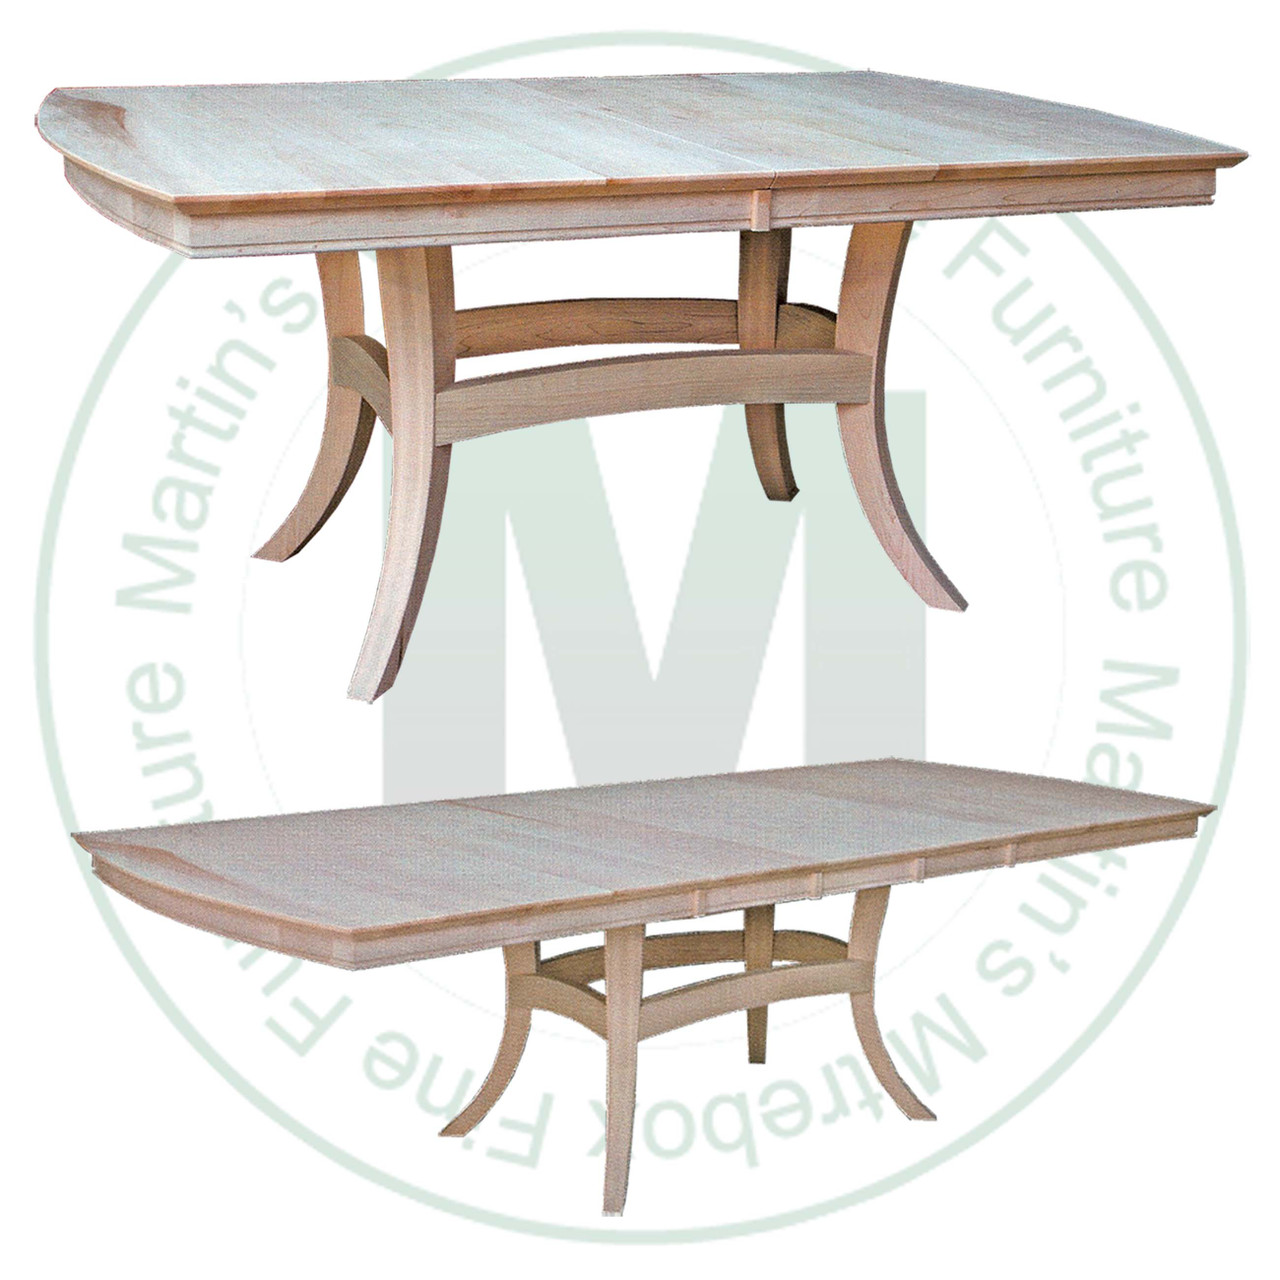 Maple Tokyo Double Pedestal Table 54''D x 96''W x 30''H With 2 - 12'' Leaves